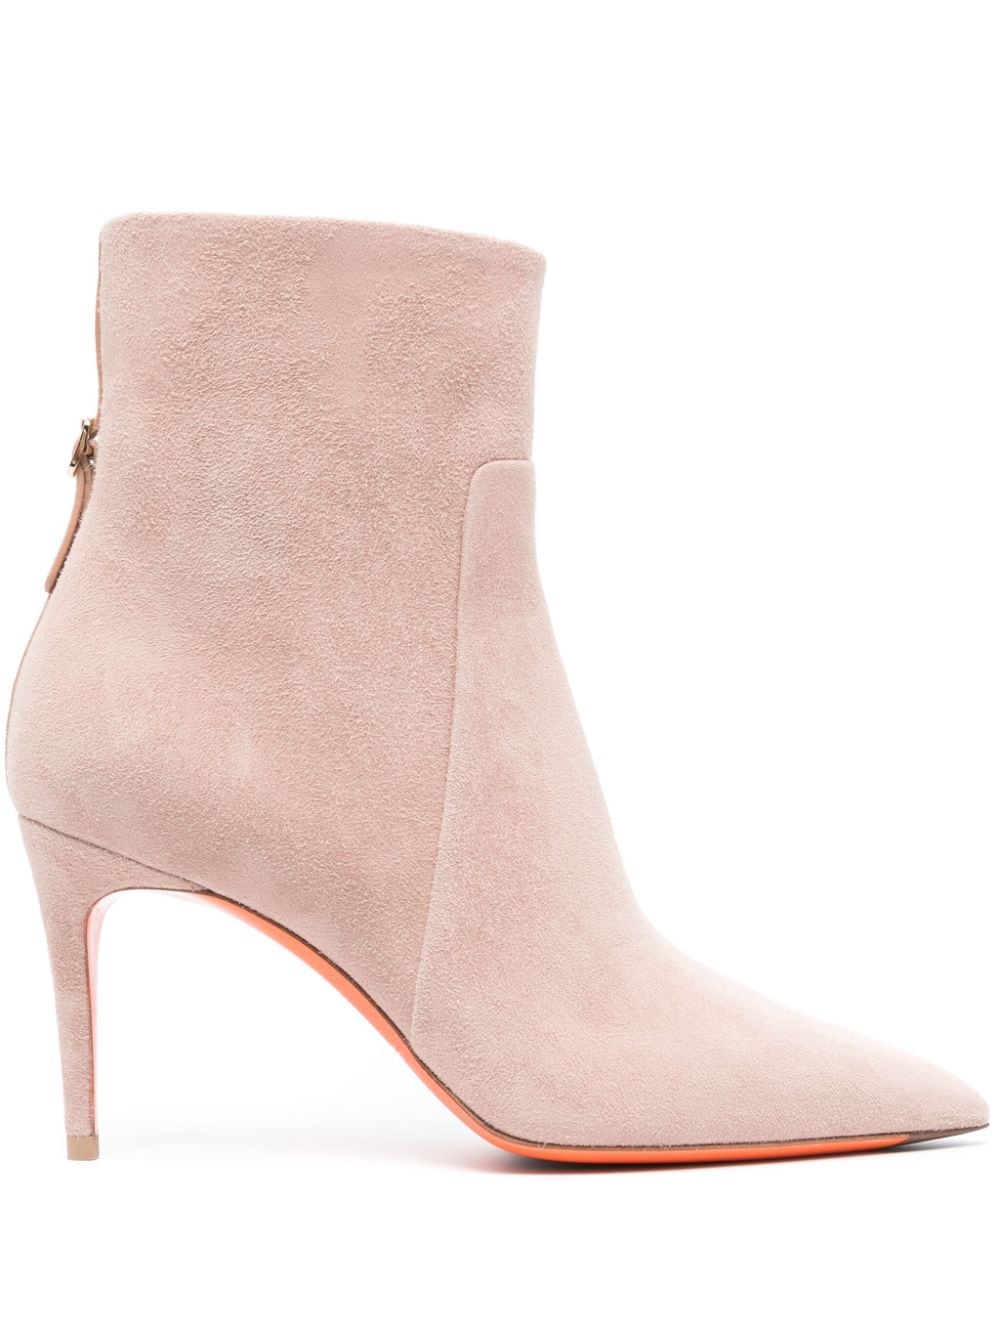 Santoni 65mm suede ankle boots Pink